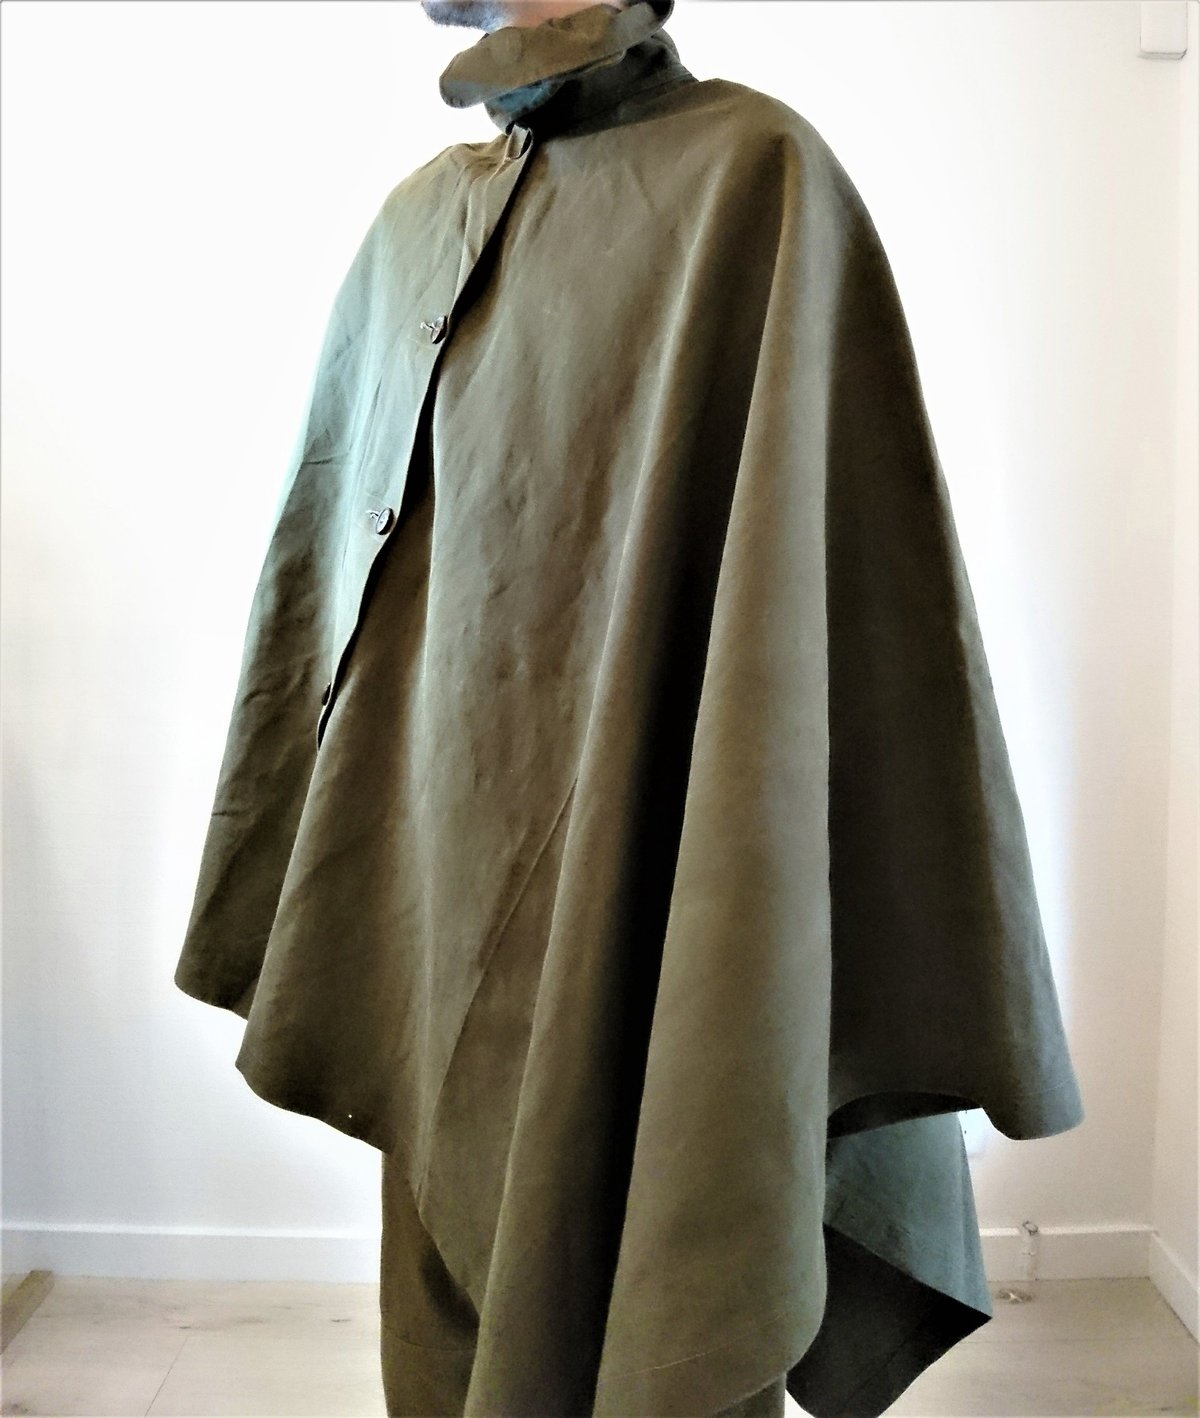 Netherlands Army 50's Sniper Cape Used】オランダ軍 5